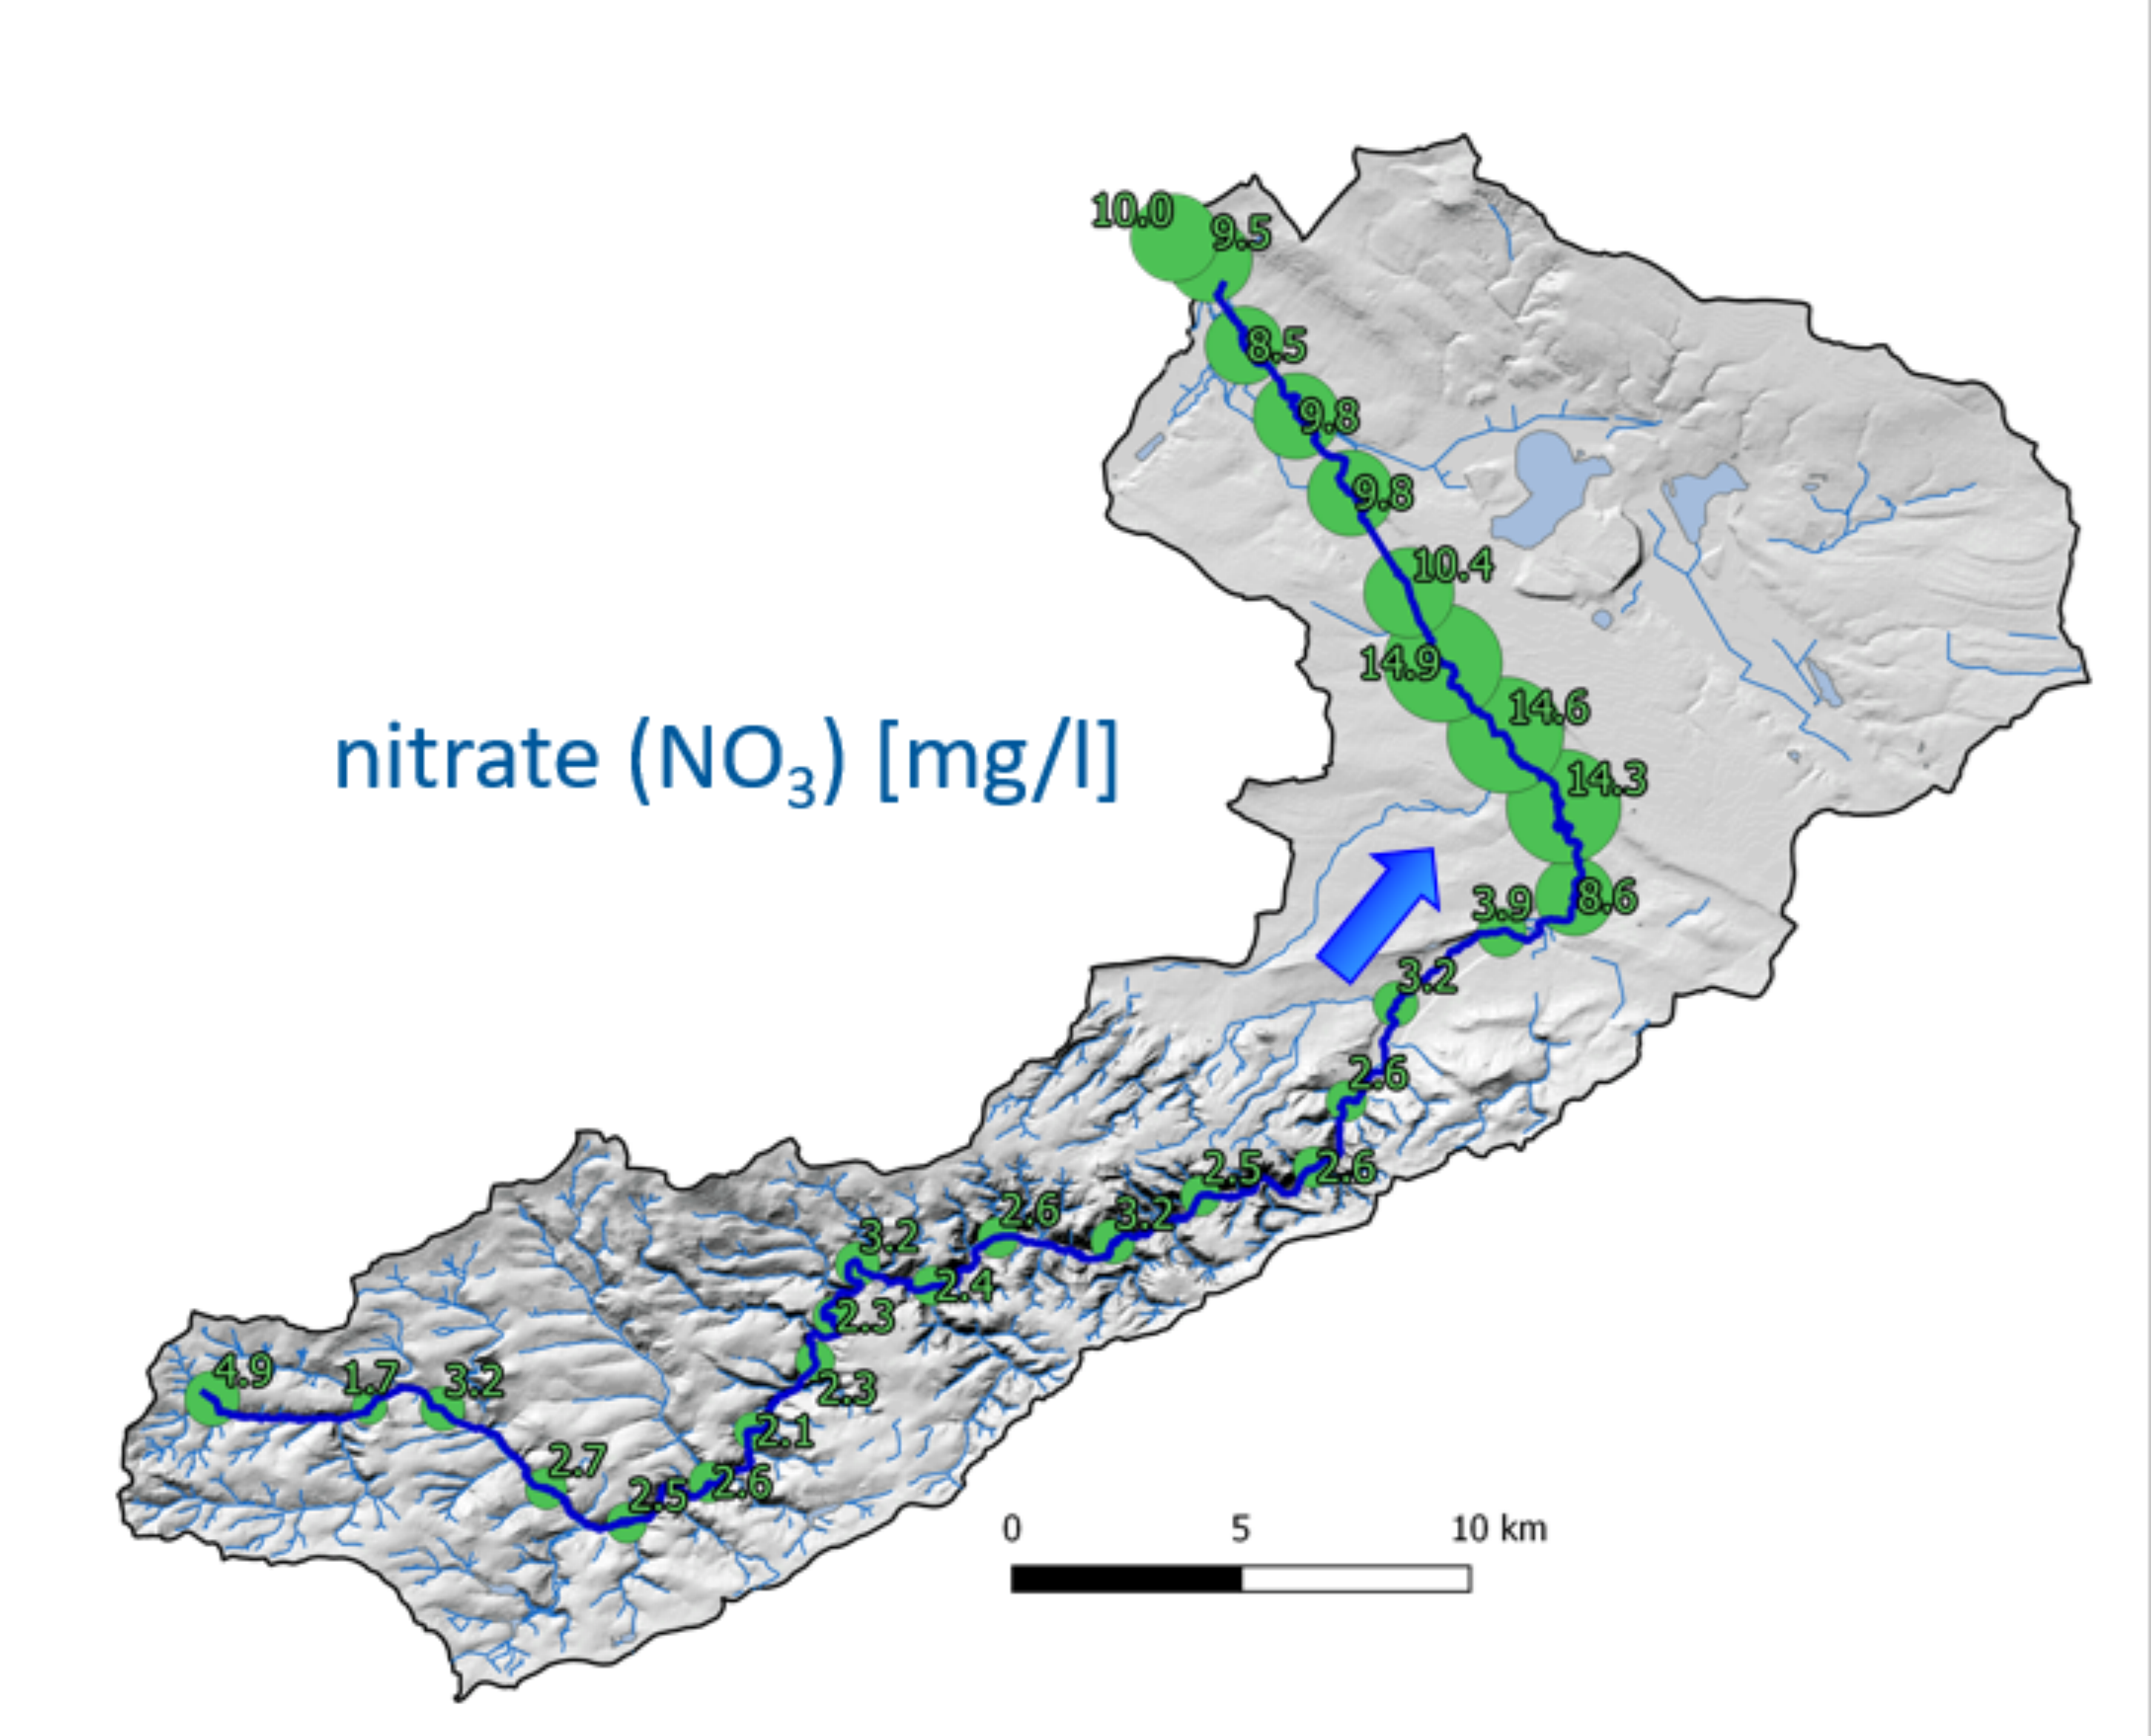 groundwater borne nitrate inputs into the Selke river